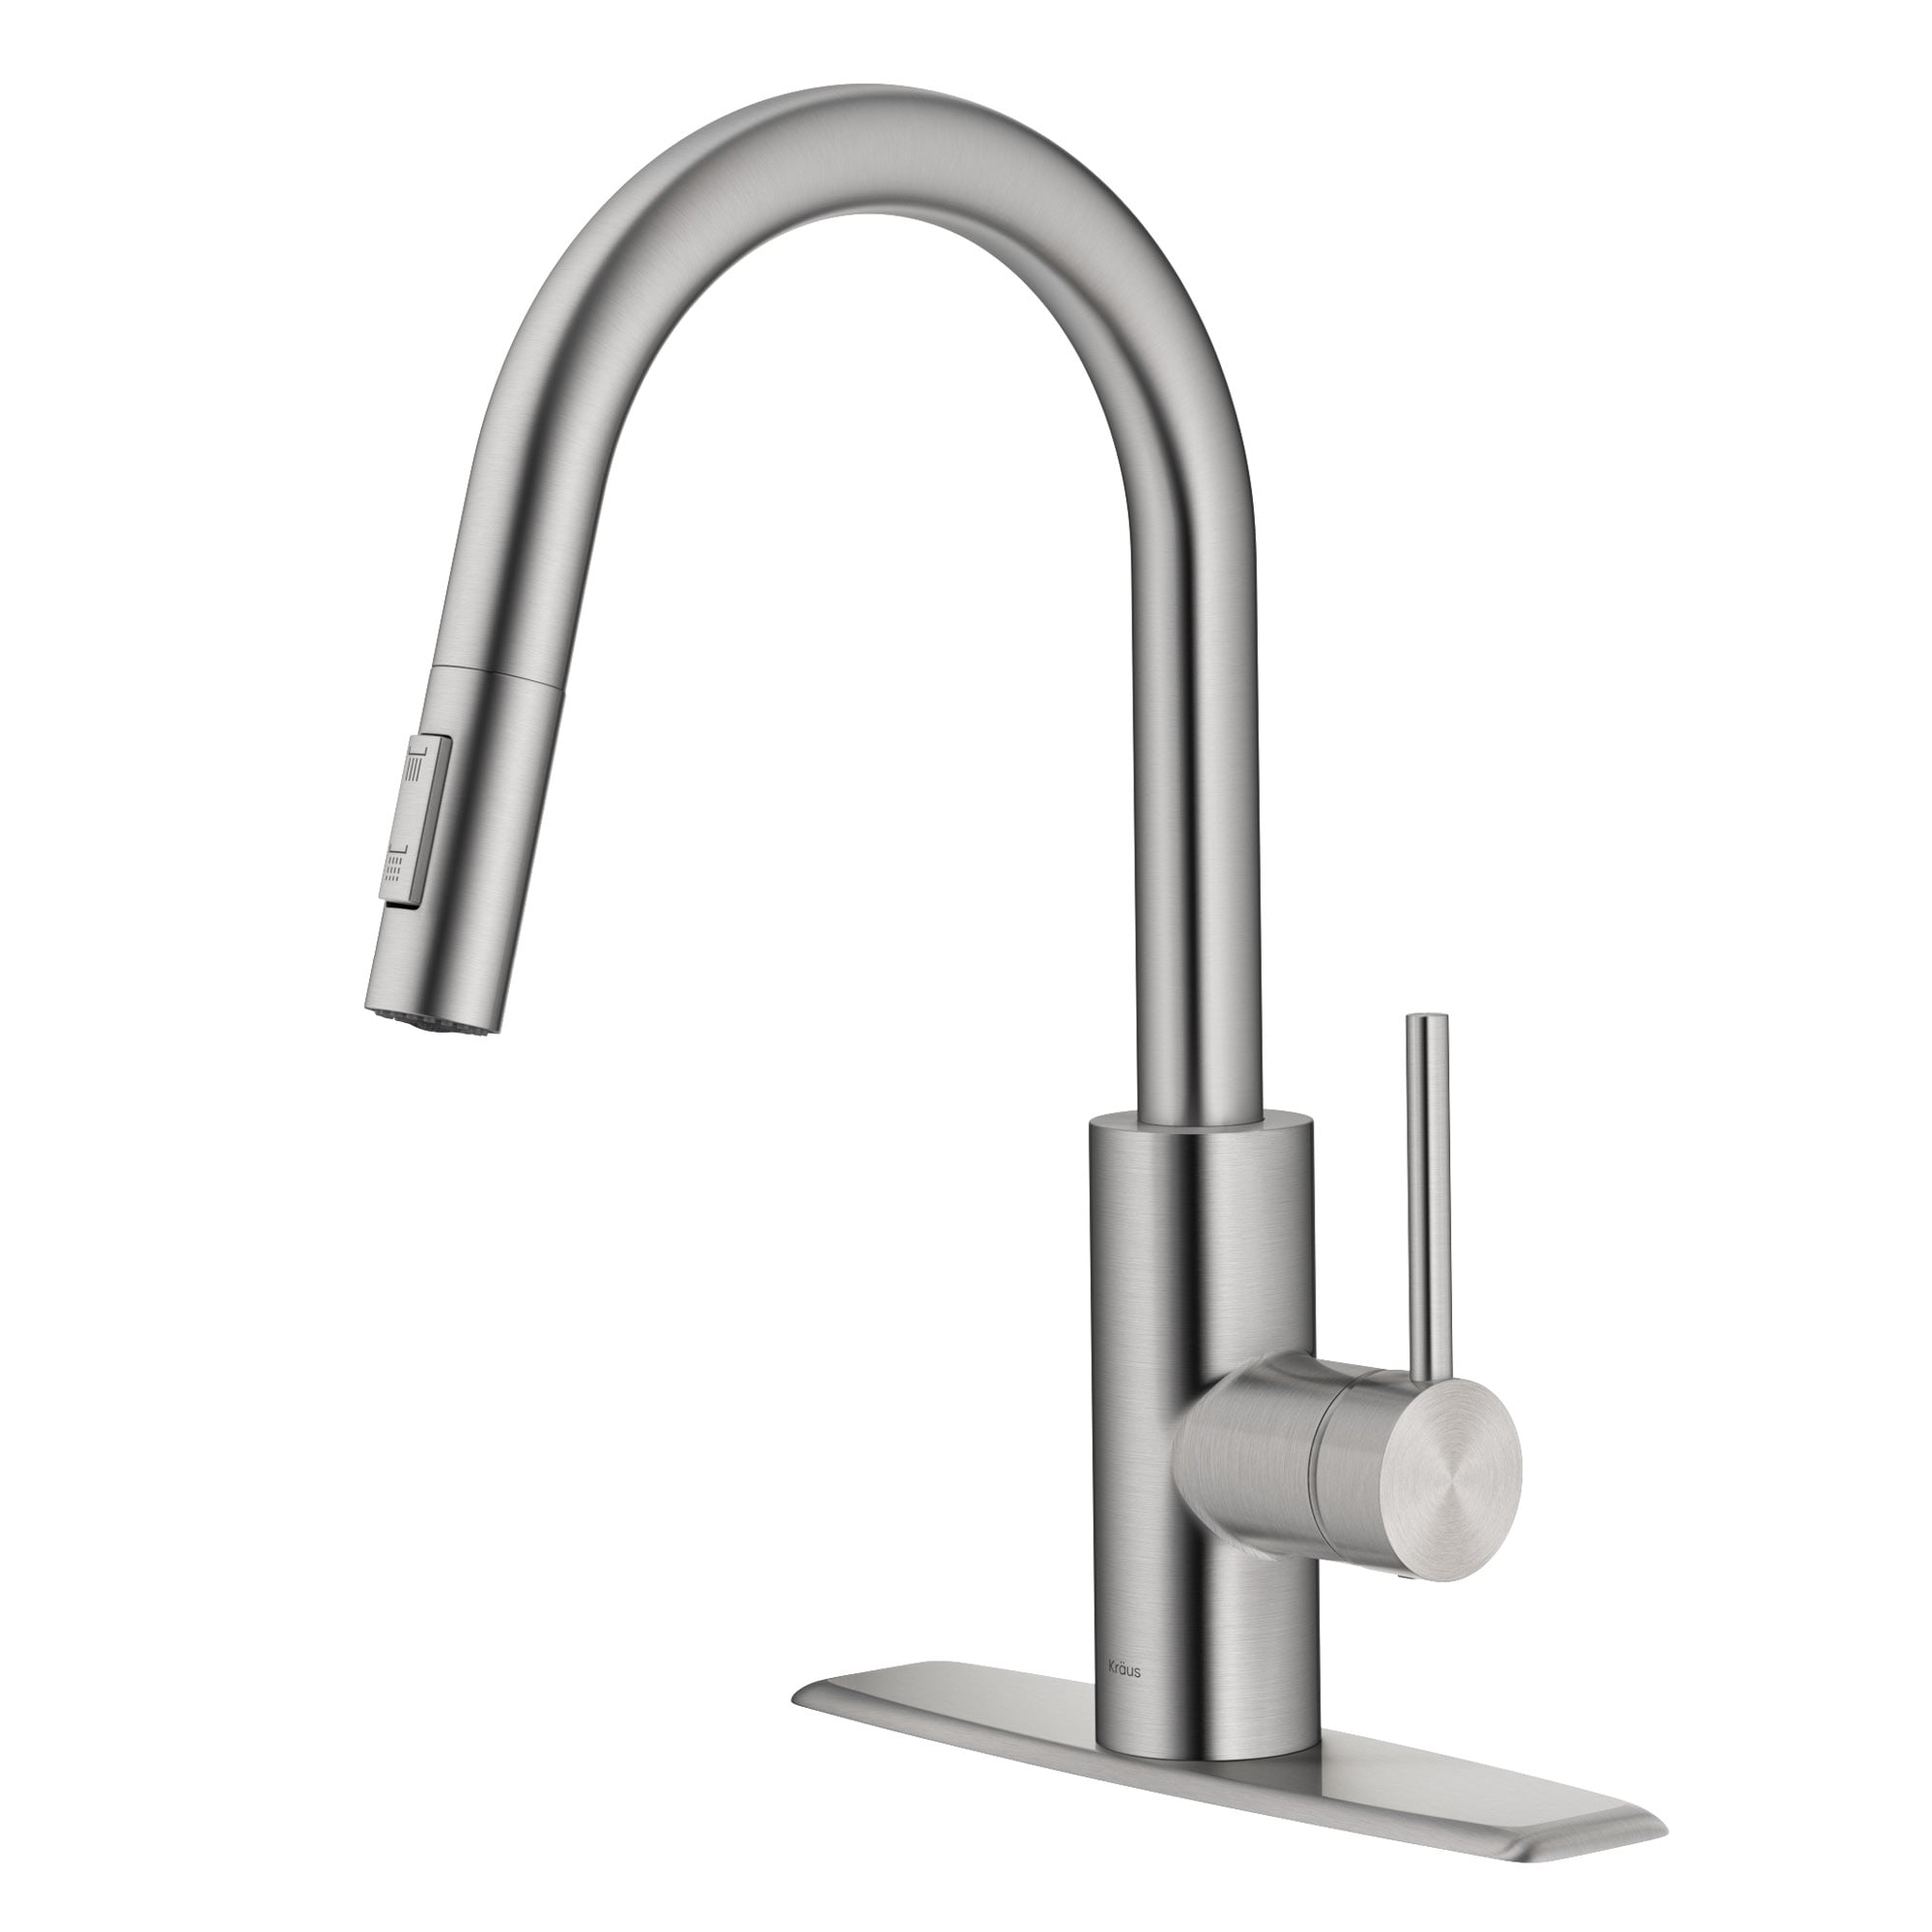 Kraus Stainless steel Kitchen Faucets at Lowes.com